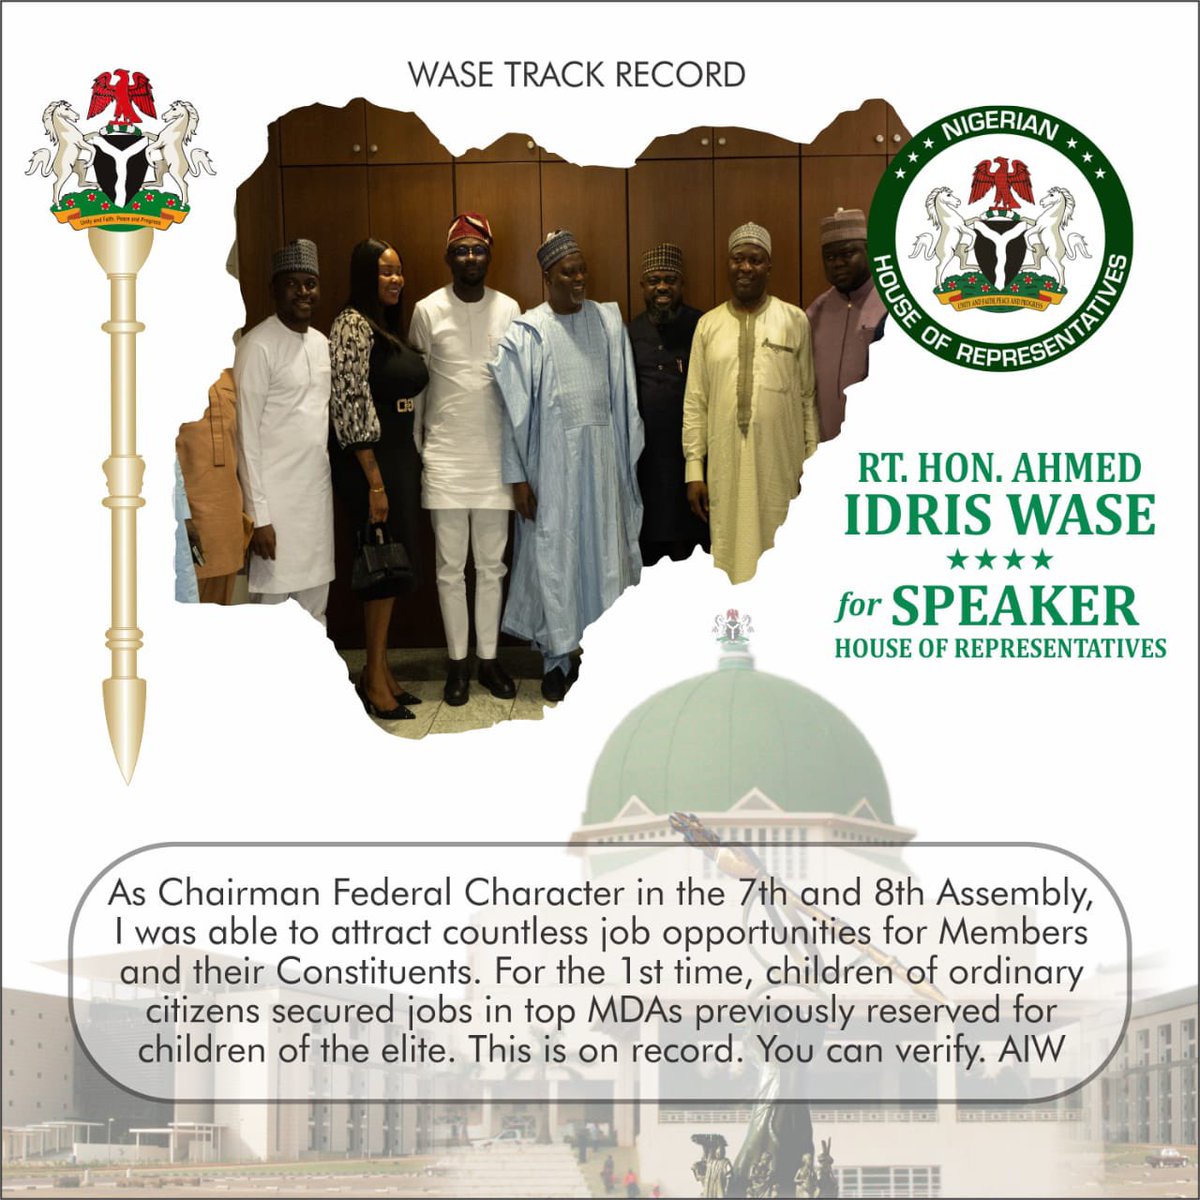 Let the records speak for itself.

#WaseForAll #WaseisCapable #Wase4Speaker #AIW #10thAssembly